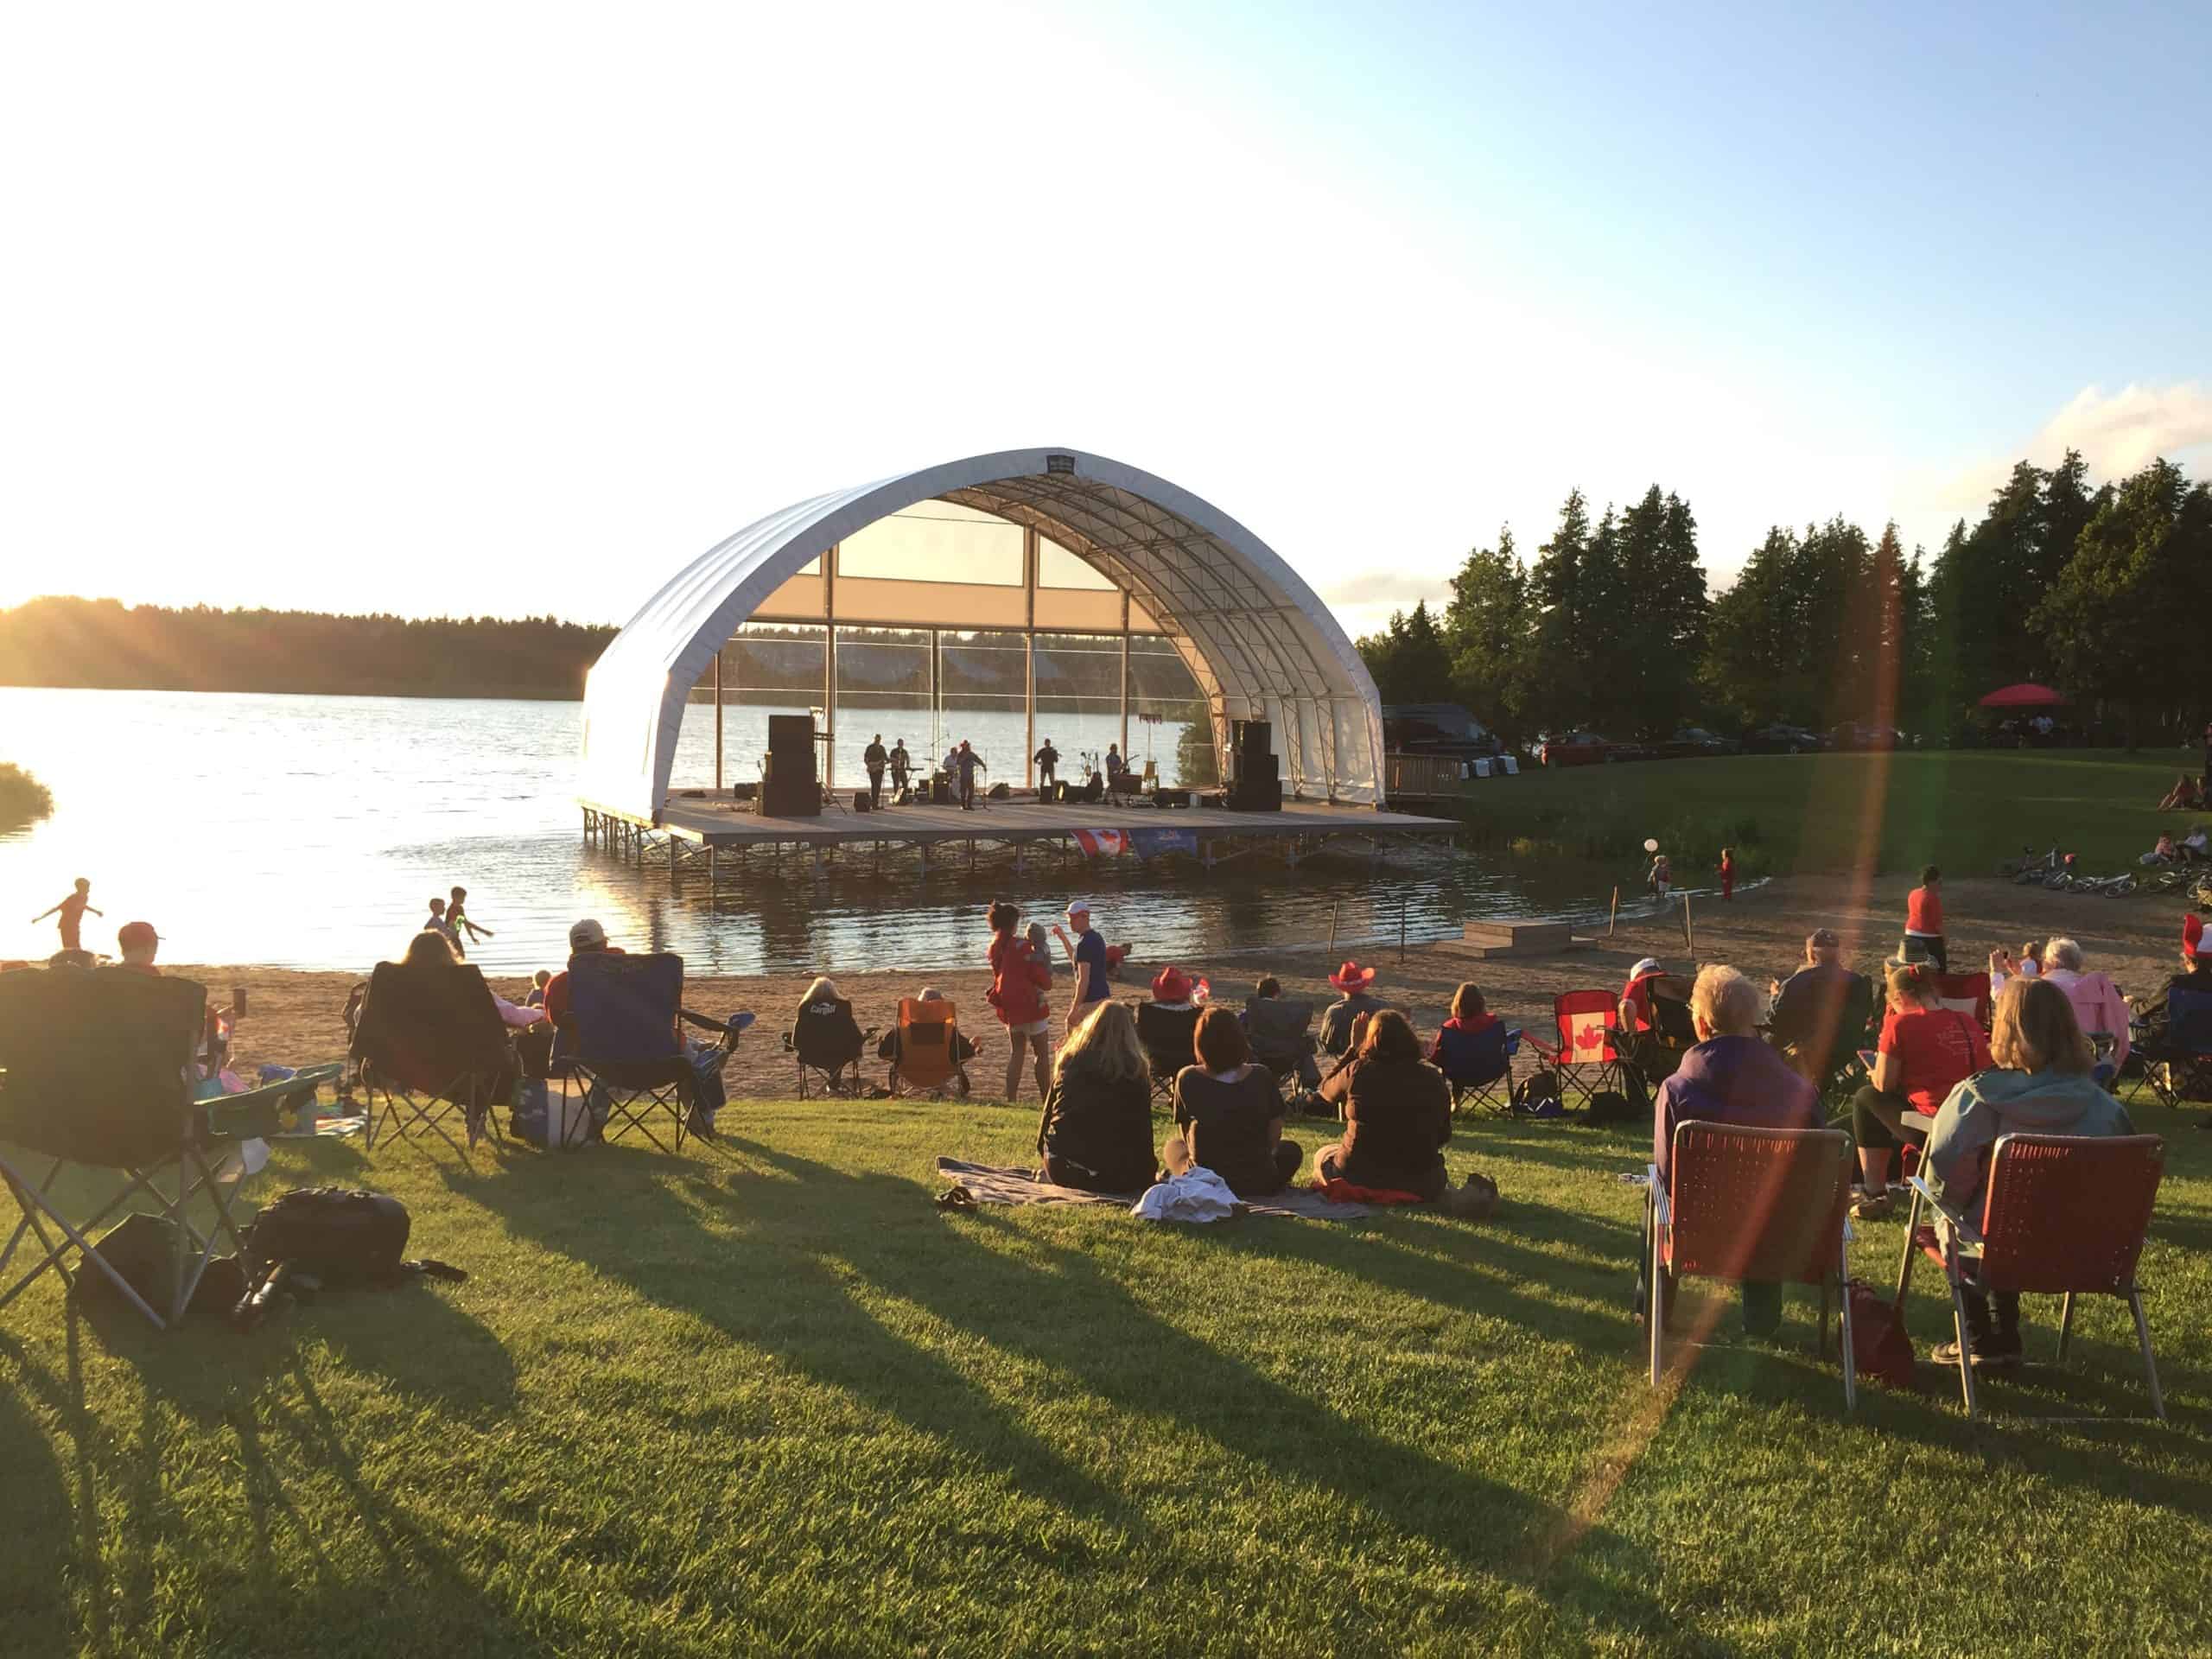 People sitting in front of an ampthitheatre with a band playing on the stage and water in the background